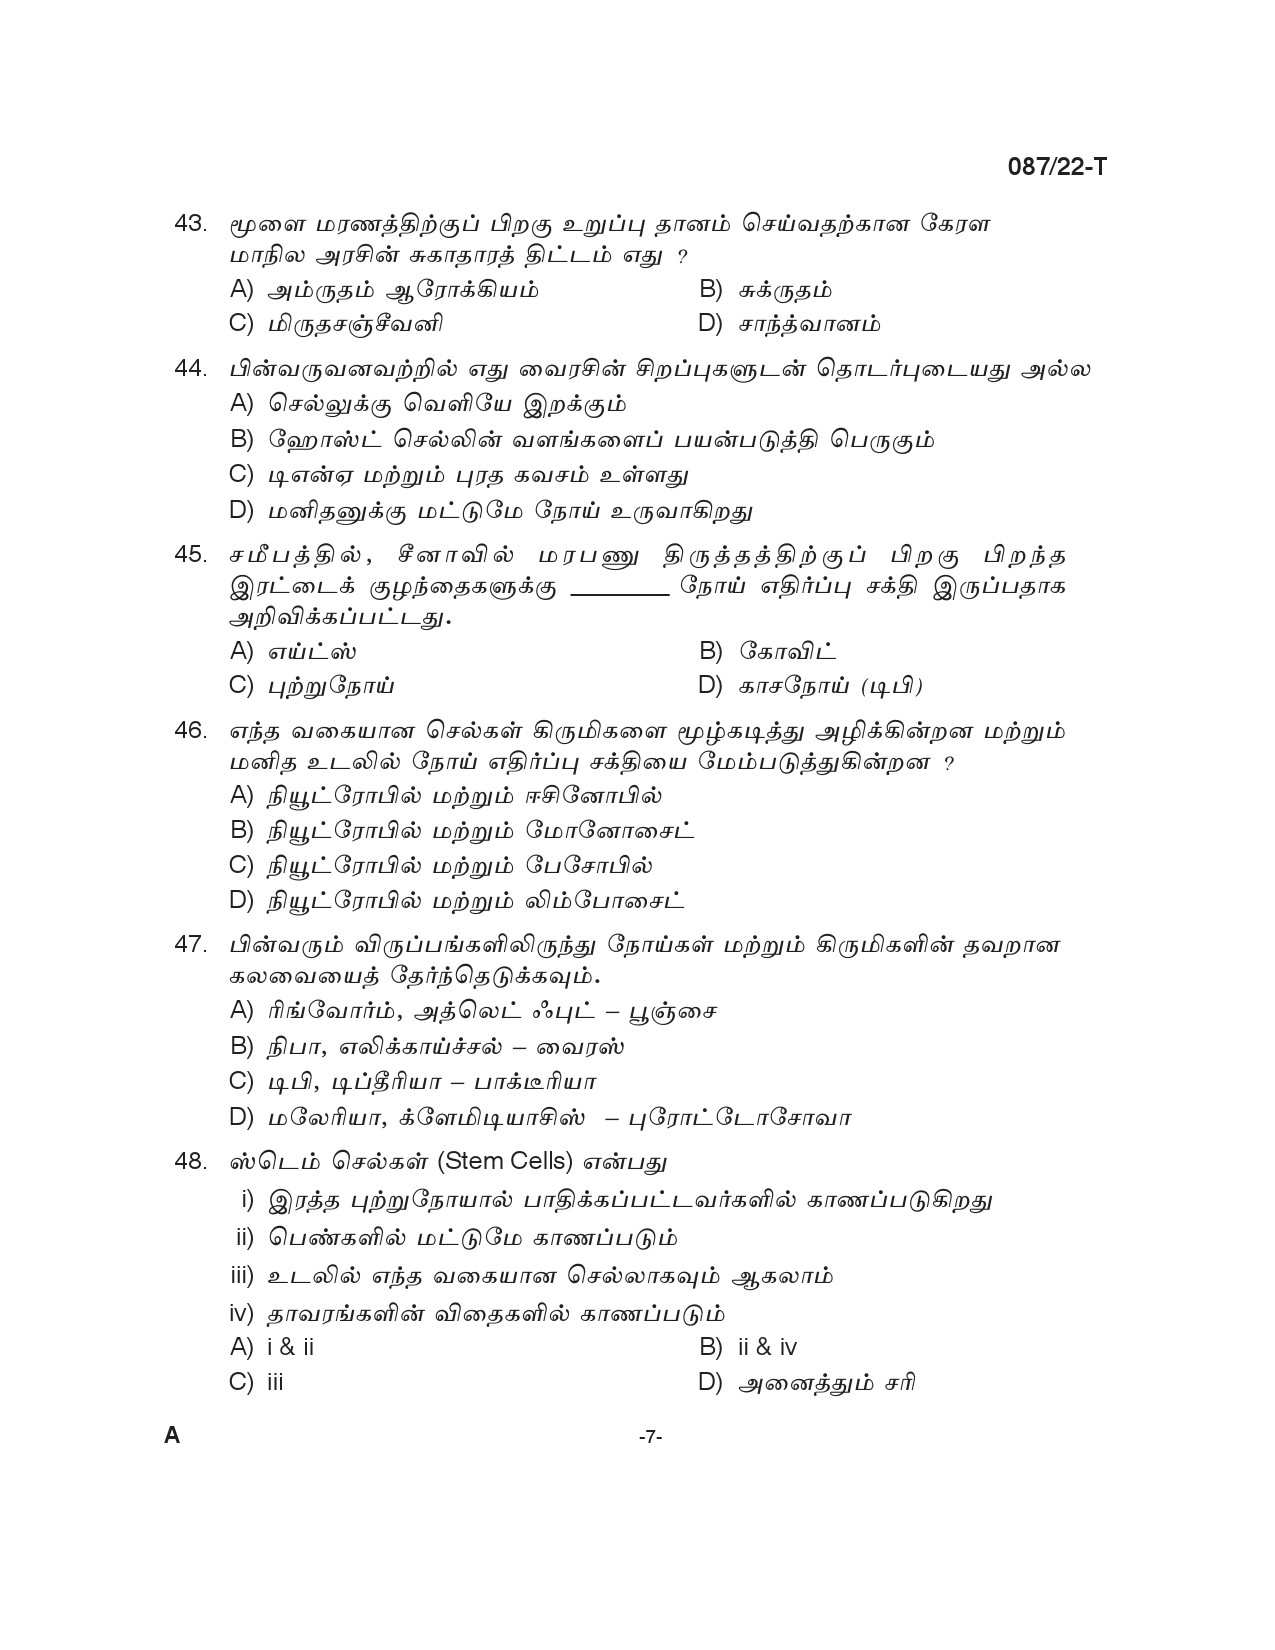 KPSC Driver and Office Attendant Tamil Exam 2022 Code 0872022 T 6